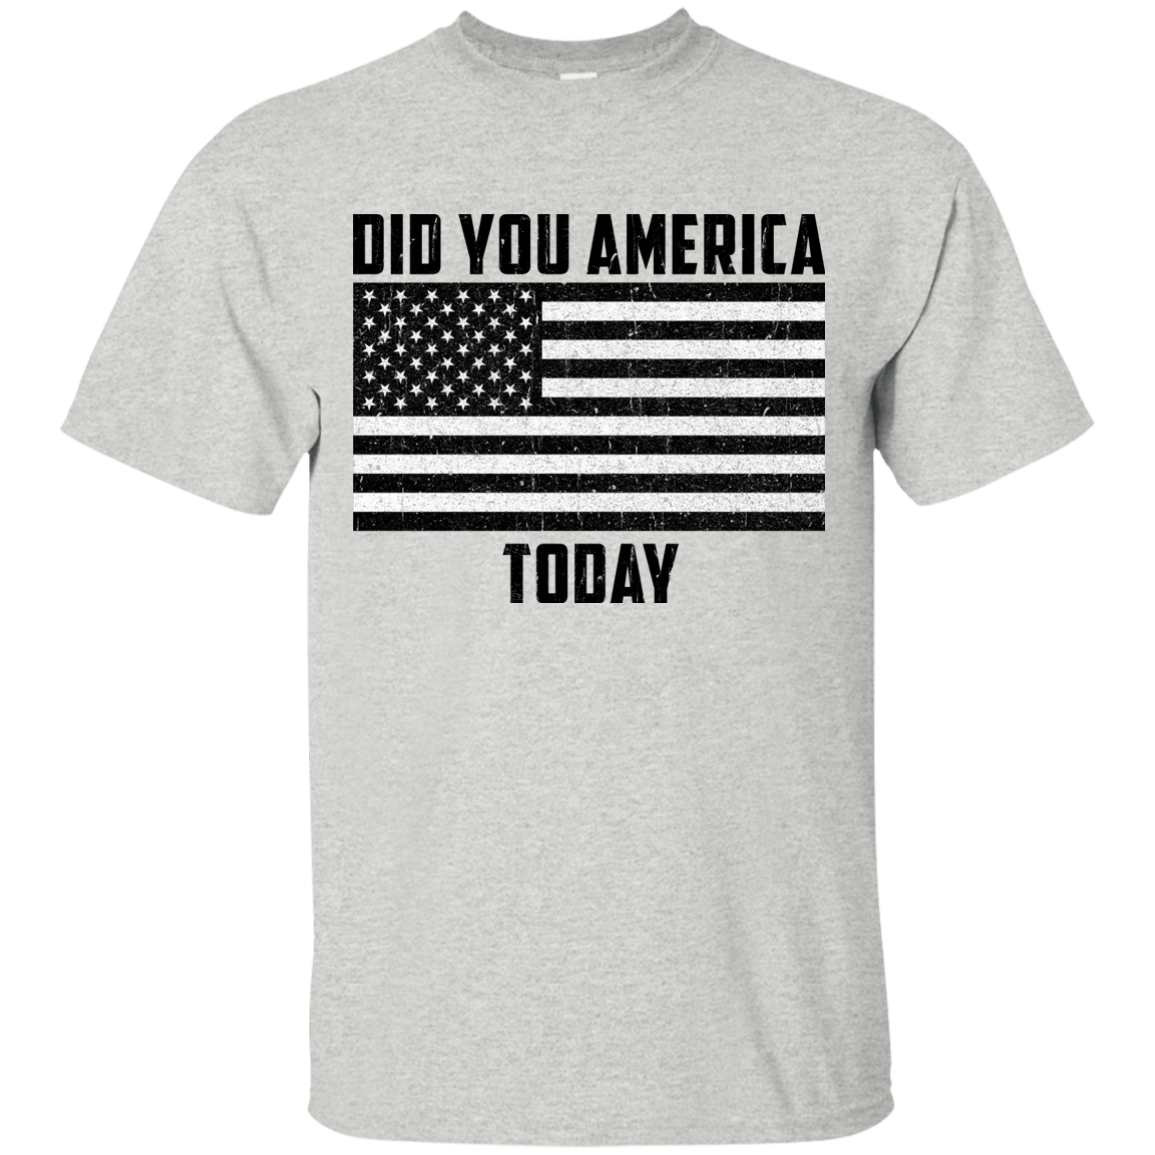 Did you America Today shirt, tank, sweater